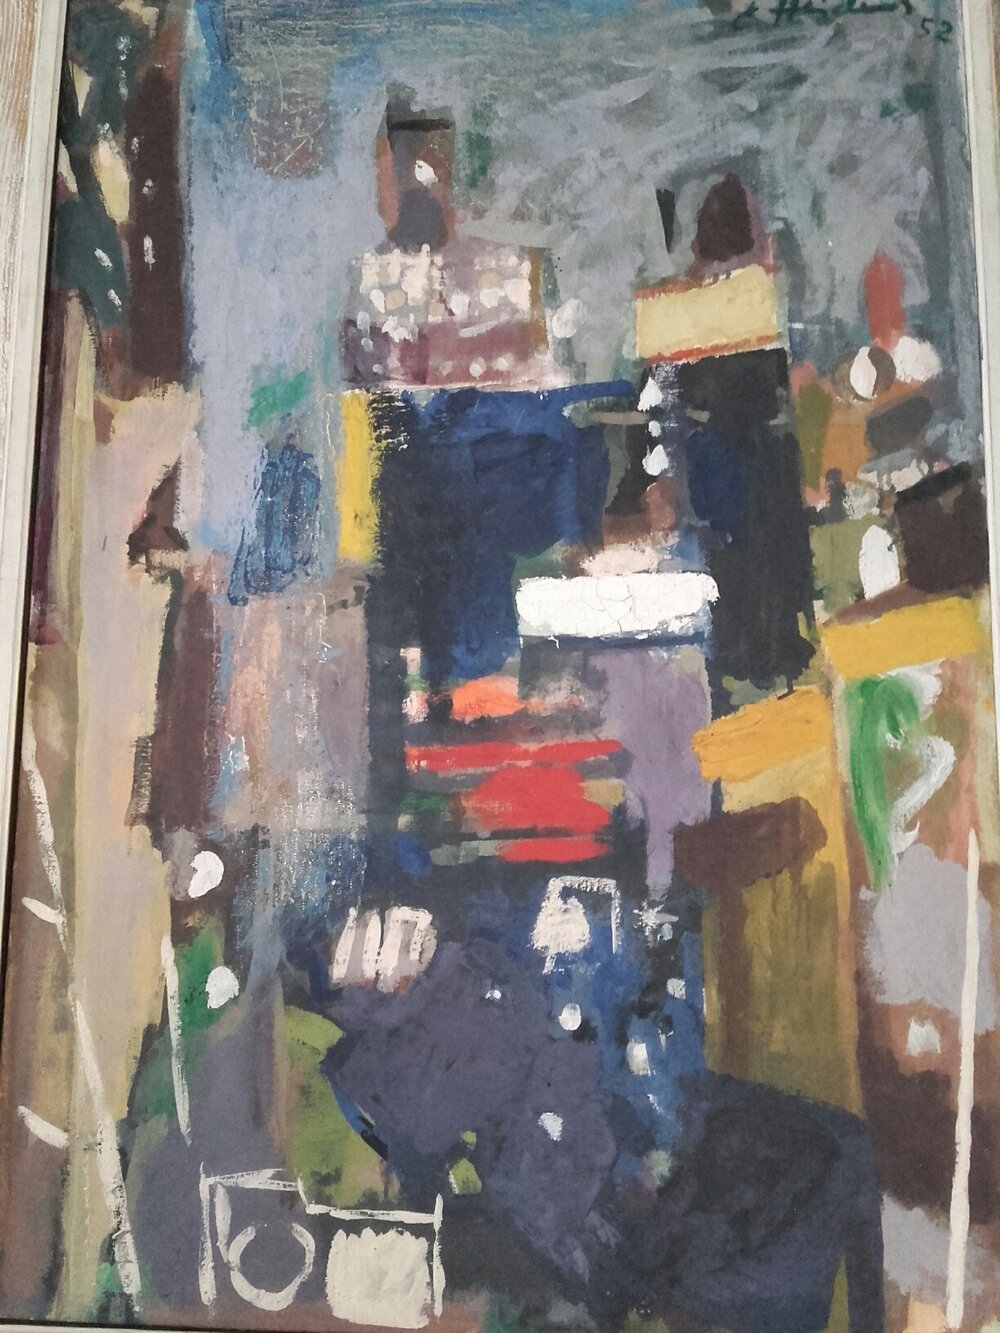 Untitled (cityscape), 1952. Collection of Don F. Jordan.